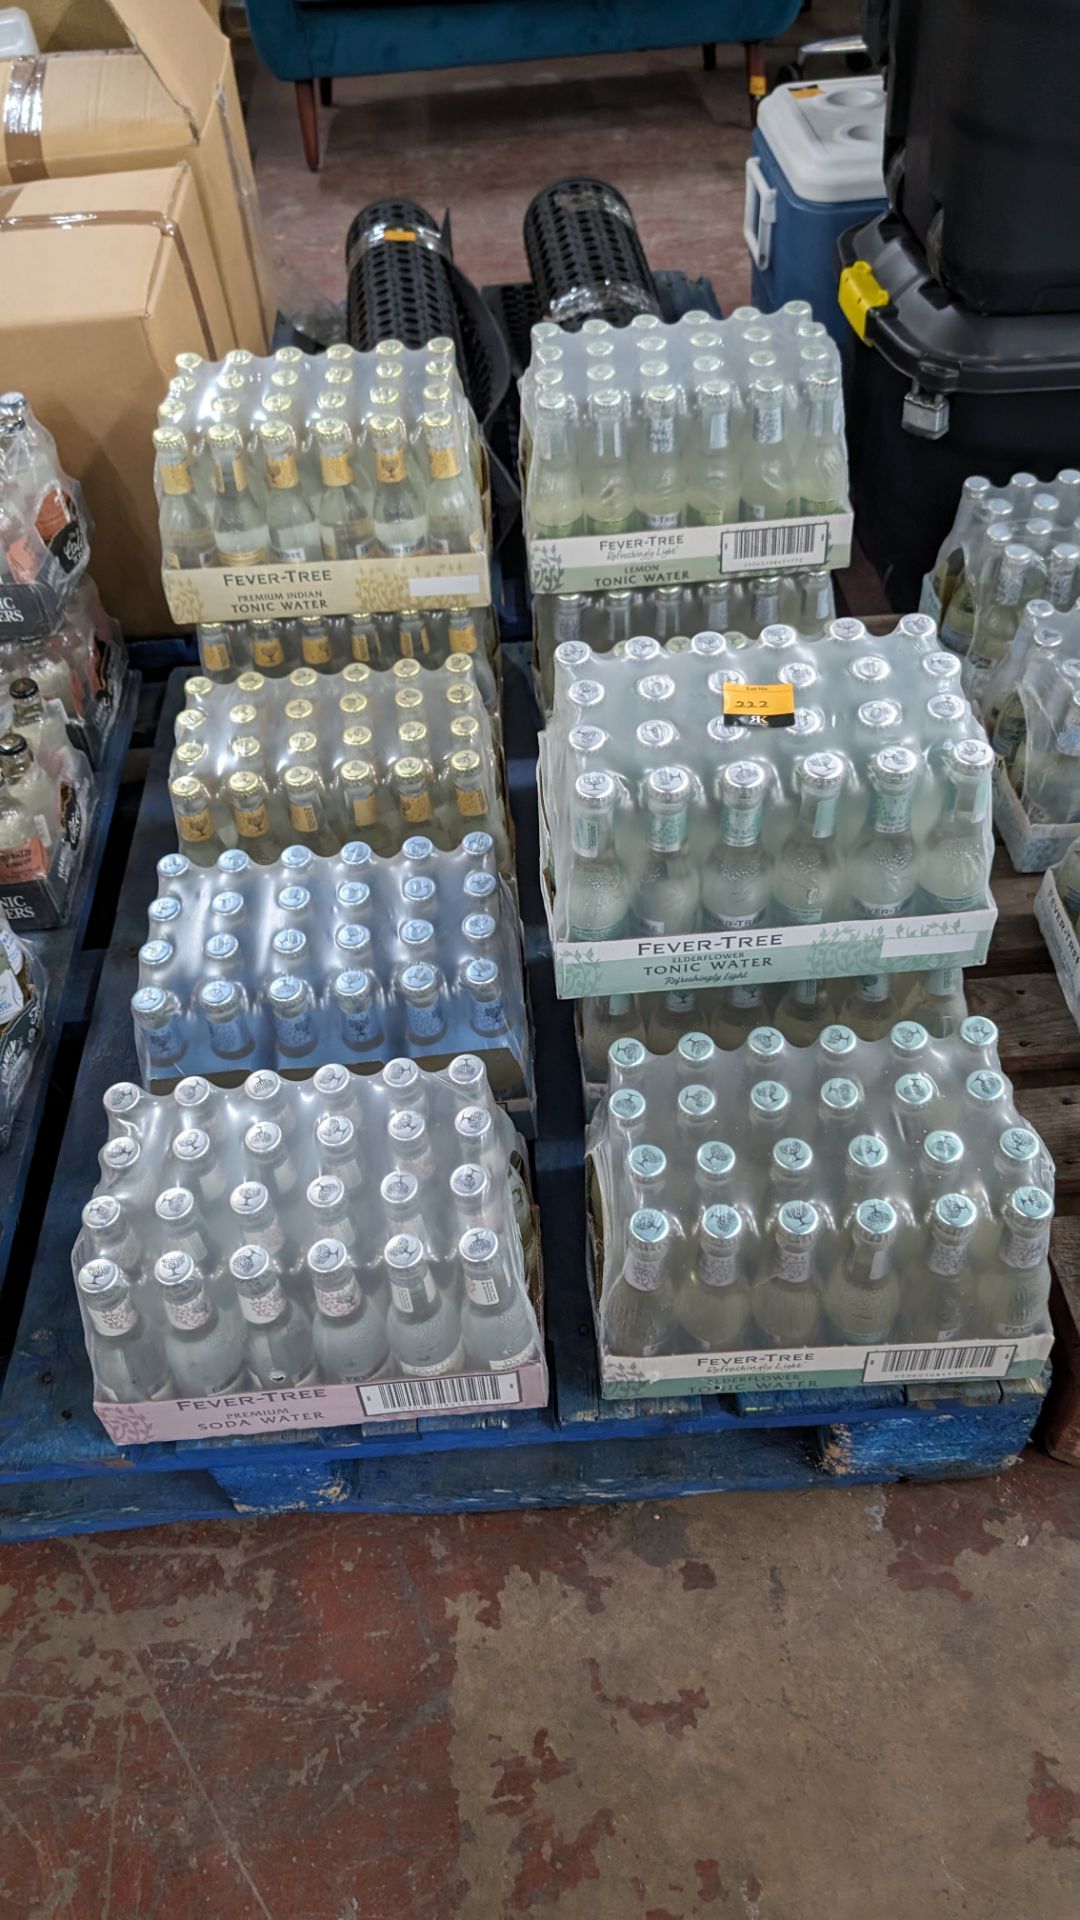 11 trays of Fever-Tree tonic water. NB: The Fever-Tree tonic water which comprises lots 219 to 222